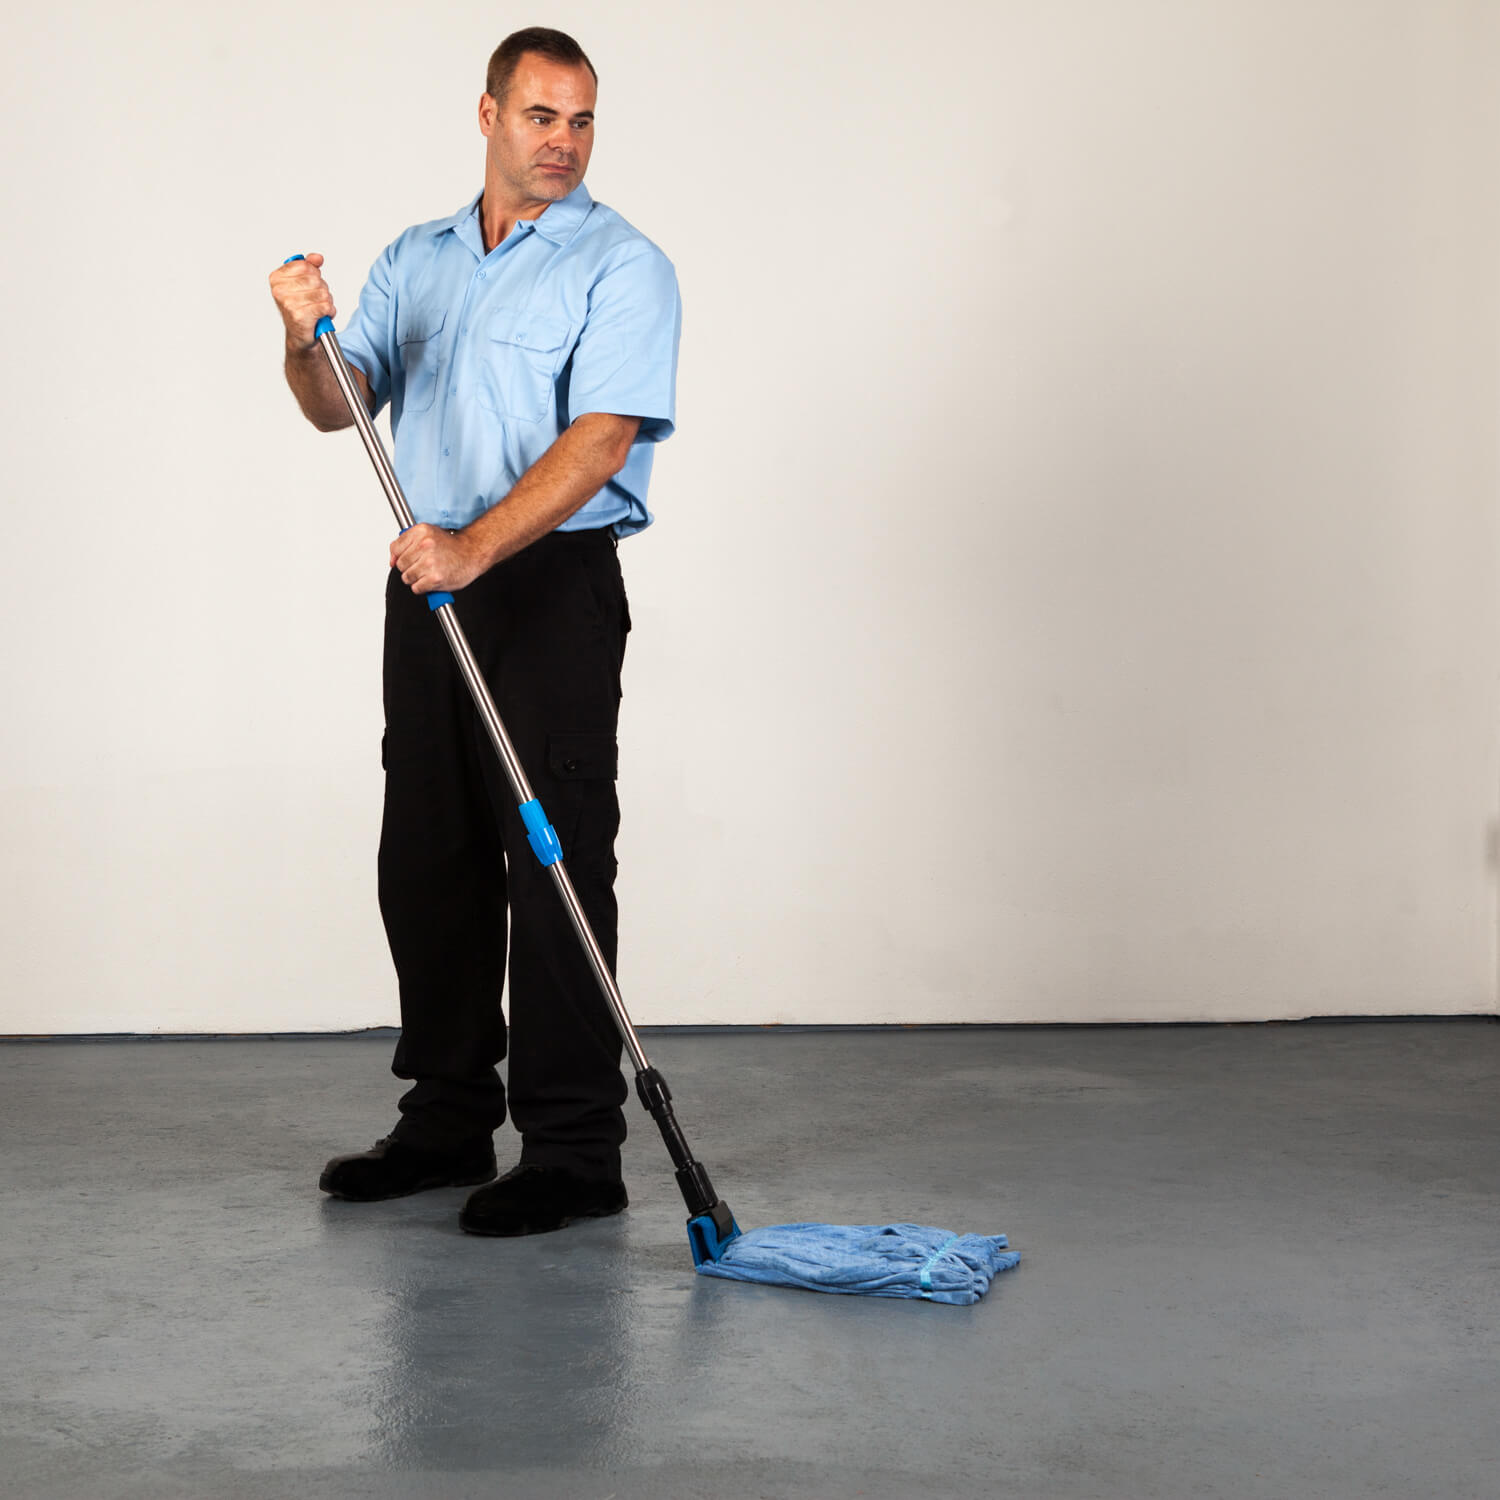 Janitor using rough floor mop on concrete